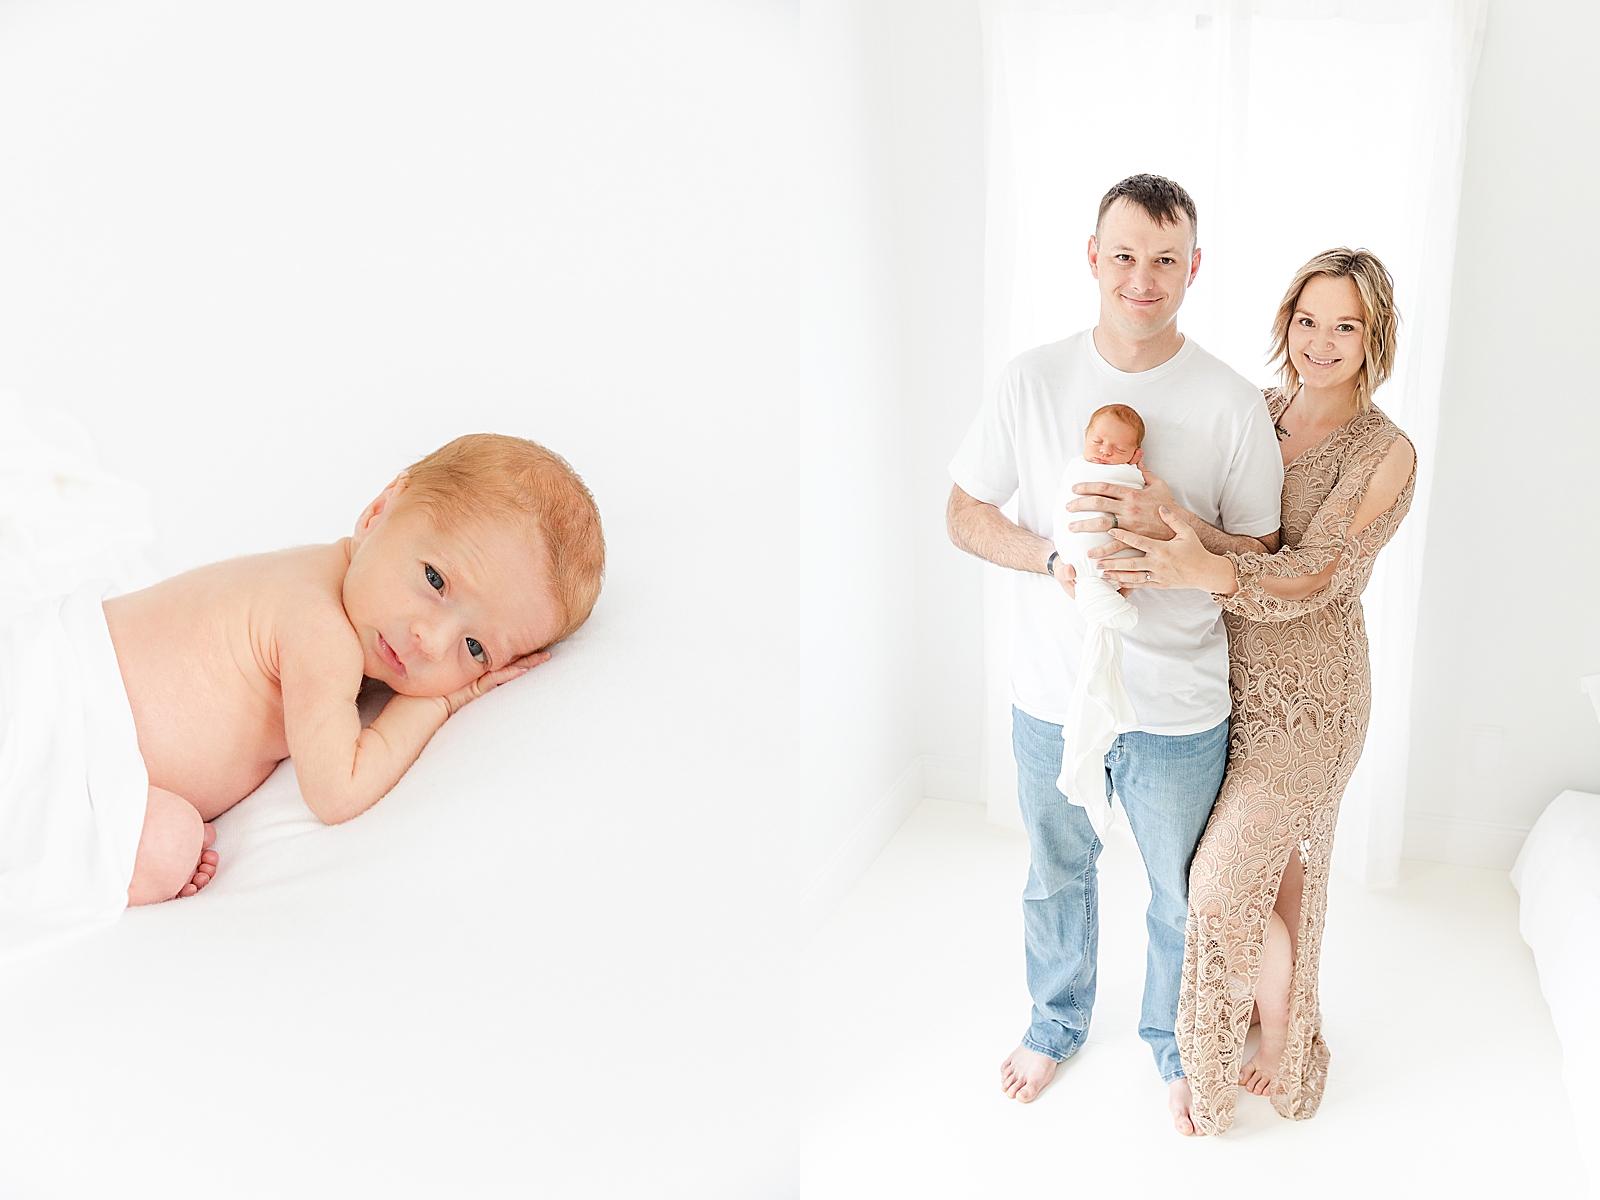 Preemie newborn posed on white backdrop with eyes open looking at camera and mom and dad holding baby asleep wrapped in a swaddle